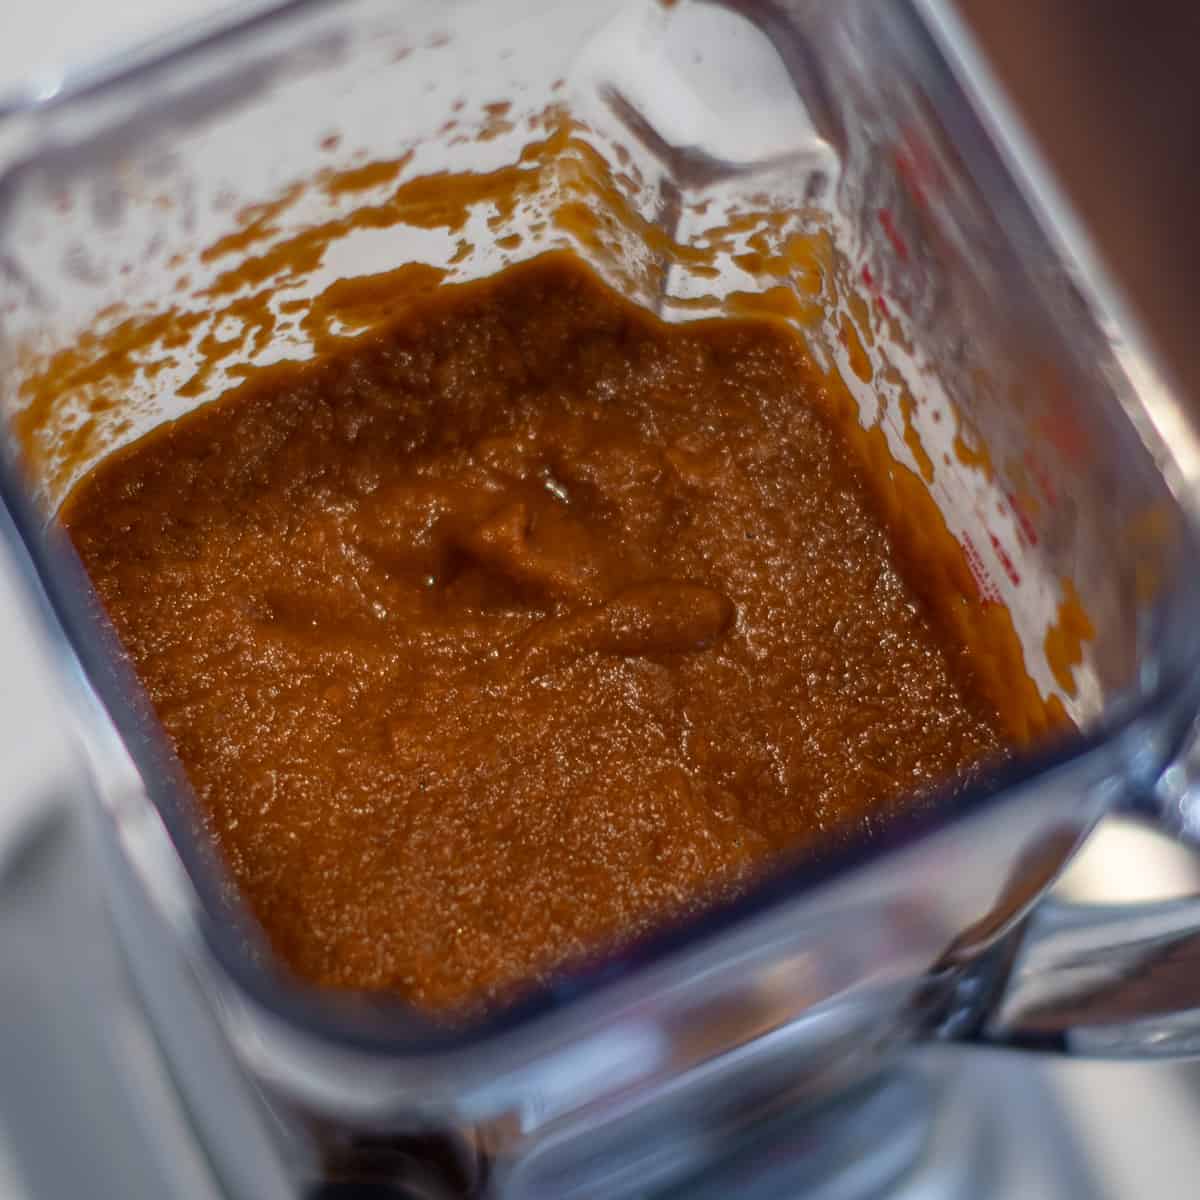 A picture of the smooth consistency of the sauce after it has blended.